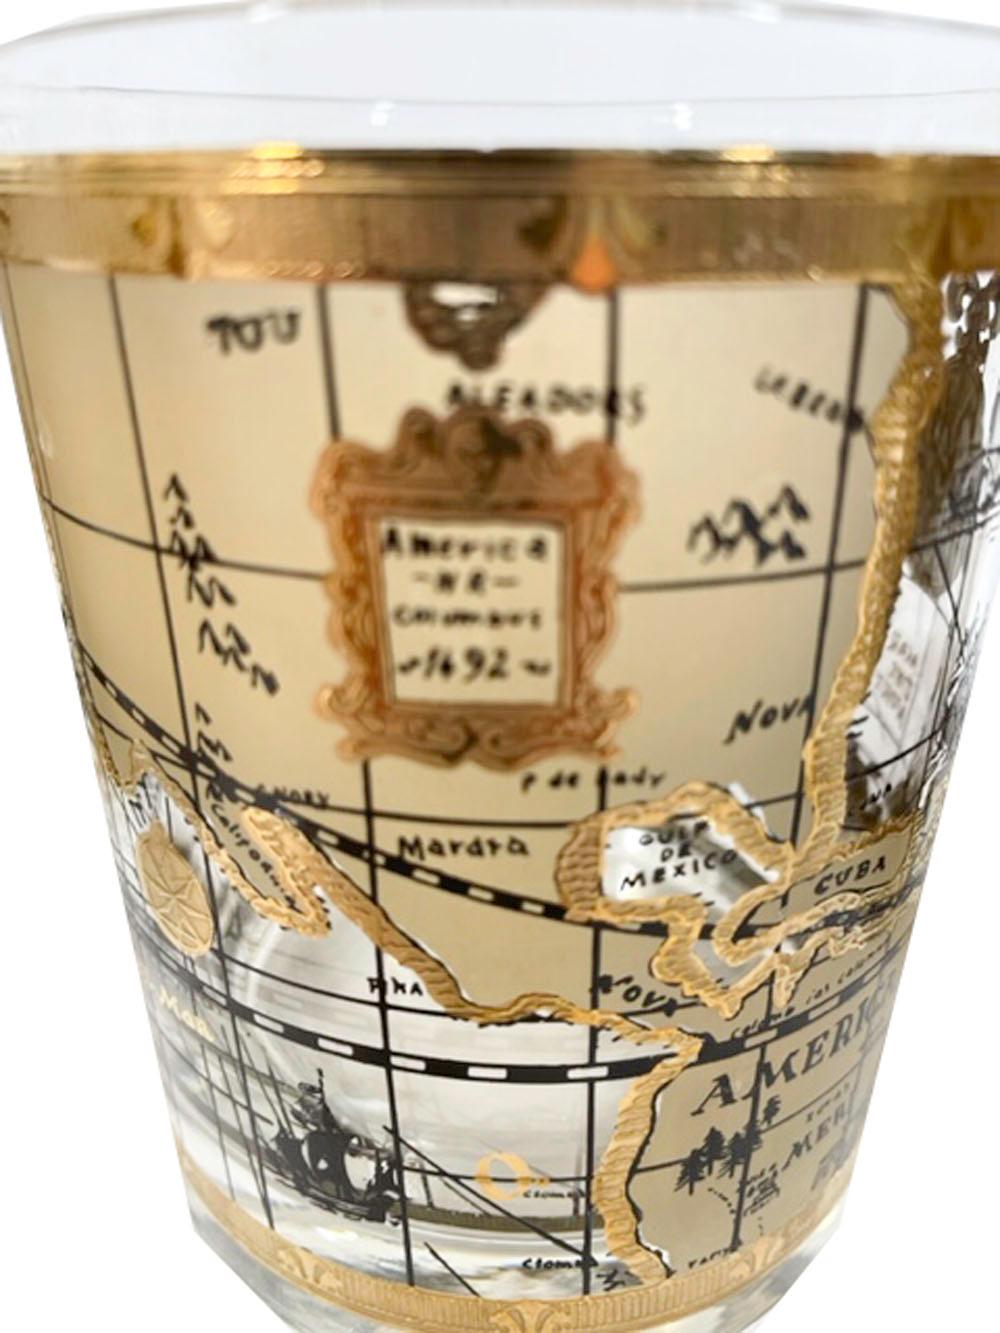 Set of 4 mid-century modern rocks glasses by Cera in the Old World Map pattern, with a map designed to look like an antique map on parchment in tans and 22k gold.

We have multiple listings for the Old World Map pattern in other forms, some with